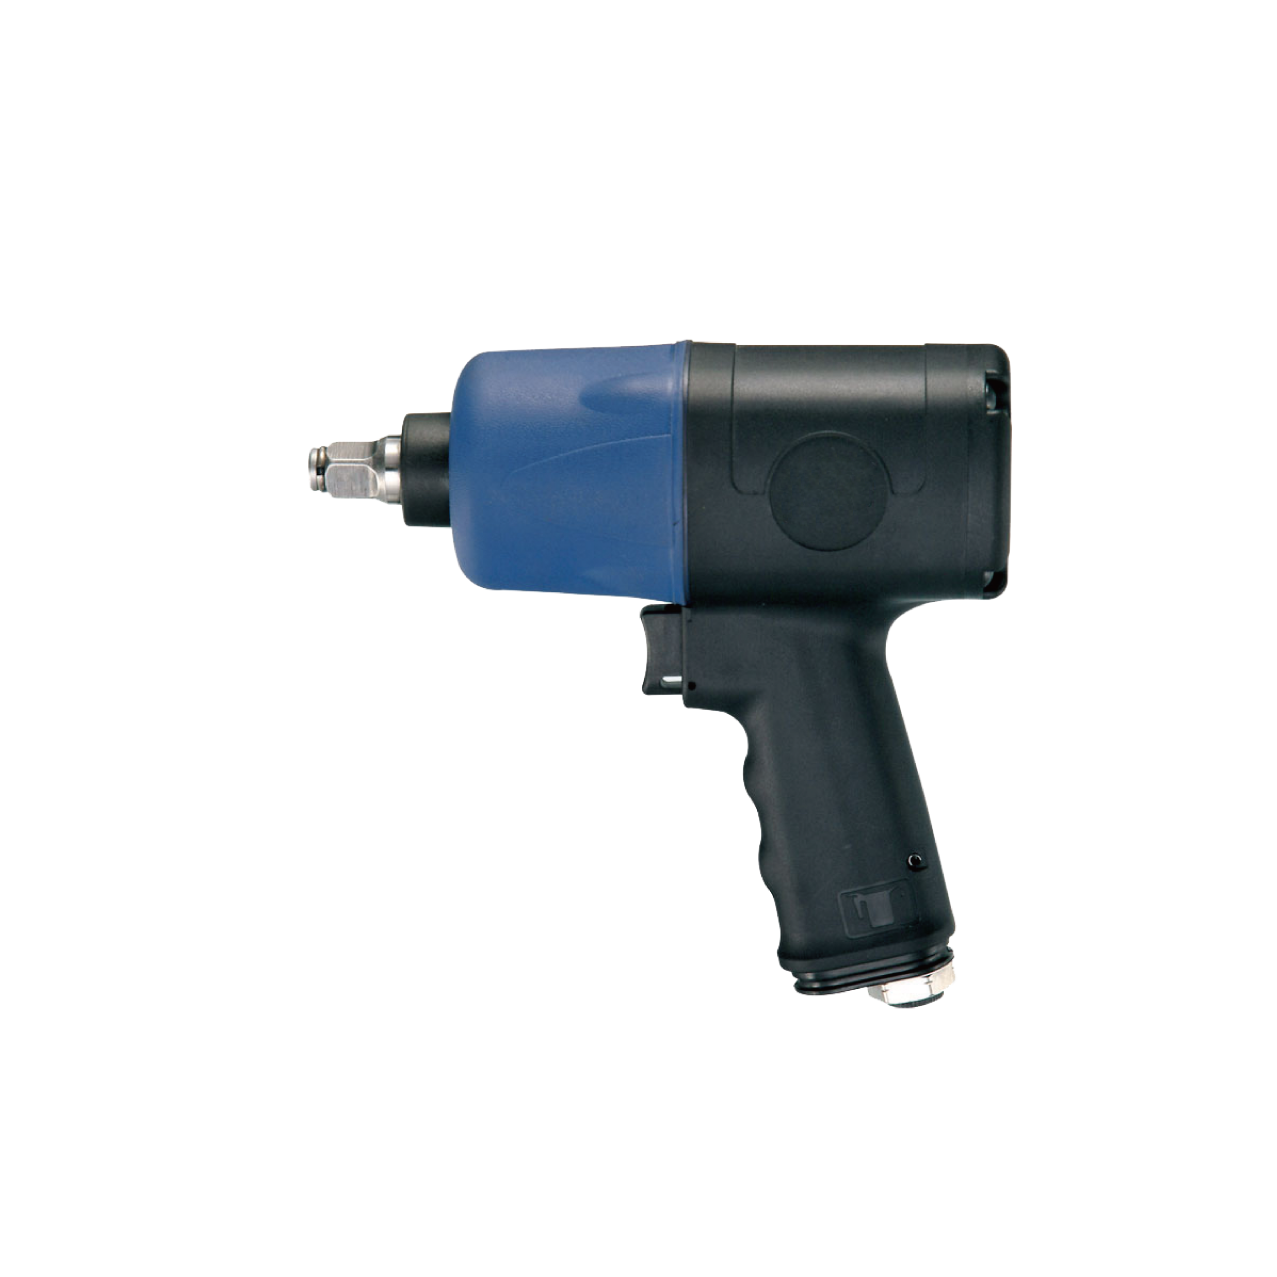 1/2" Dr. Air Impact Wrench- Twin Hammer